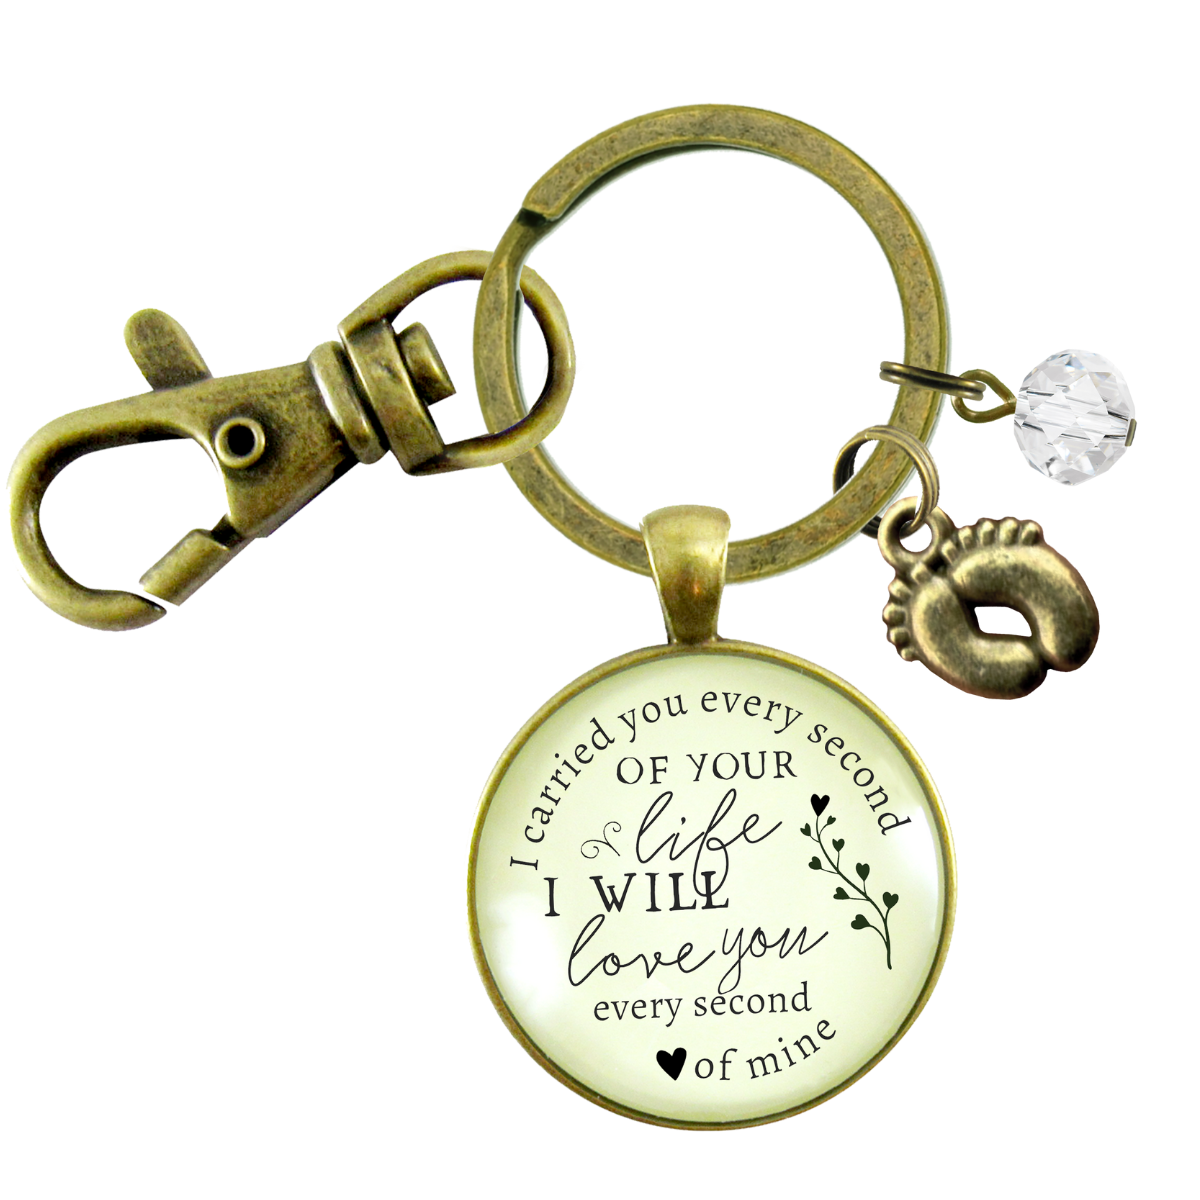 Miscarriage Keychain I Carried You Every Second Of Your Life Baby Loss Remembrance Keepsake  Keychain - Women - Gutsy Goodness Handmade Jewelry